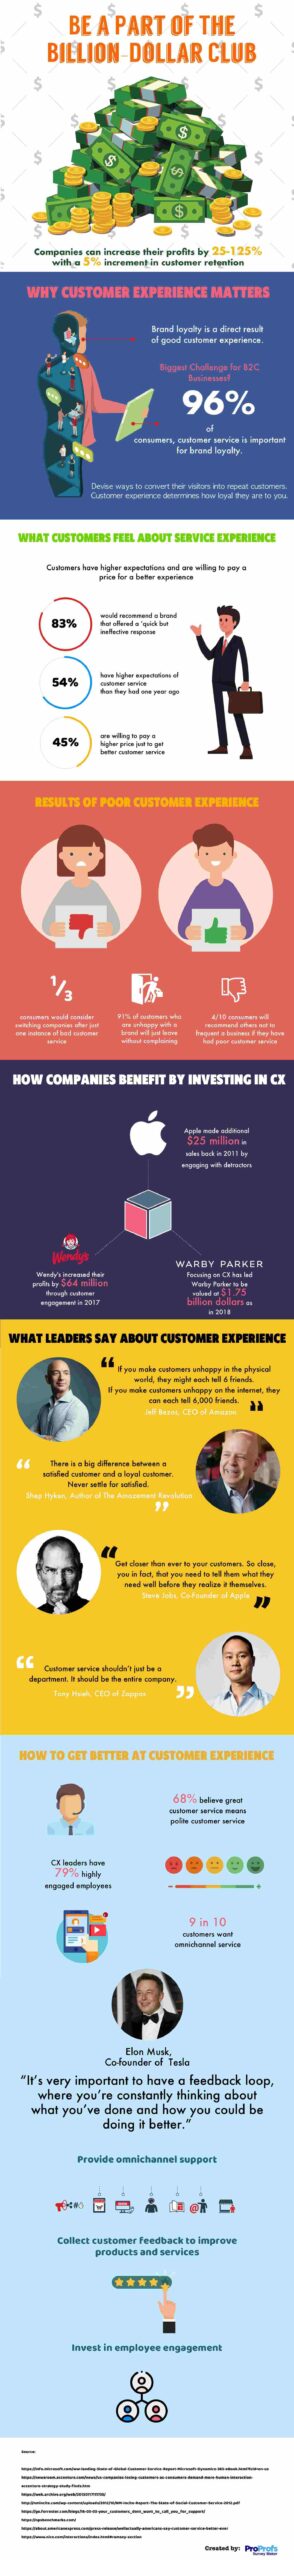 Customer-Experience-The-Golden-Ticket-to-The-Billion-Dollar-Club-INFOGRAPHIC-3